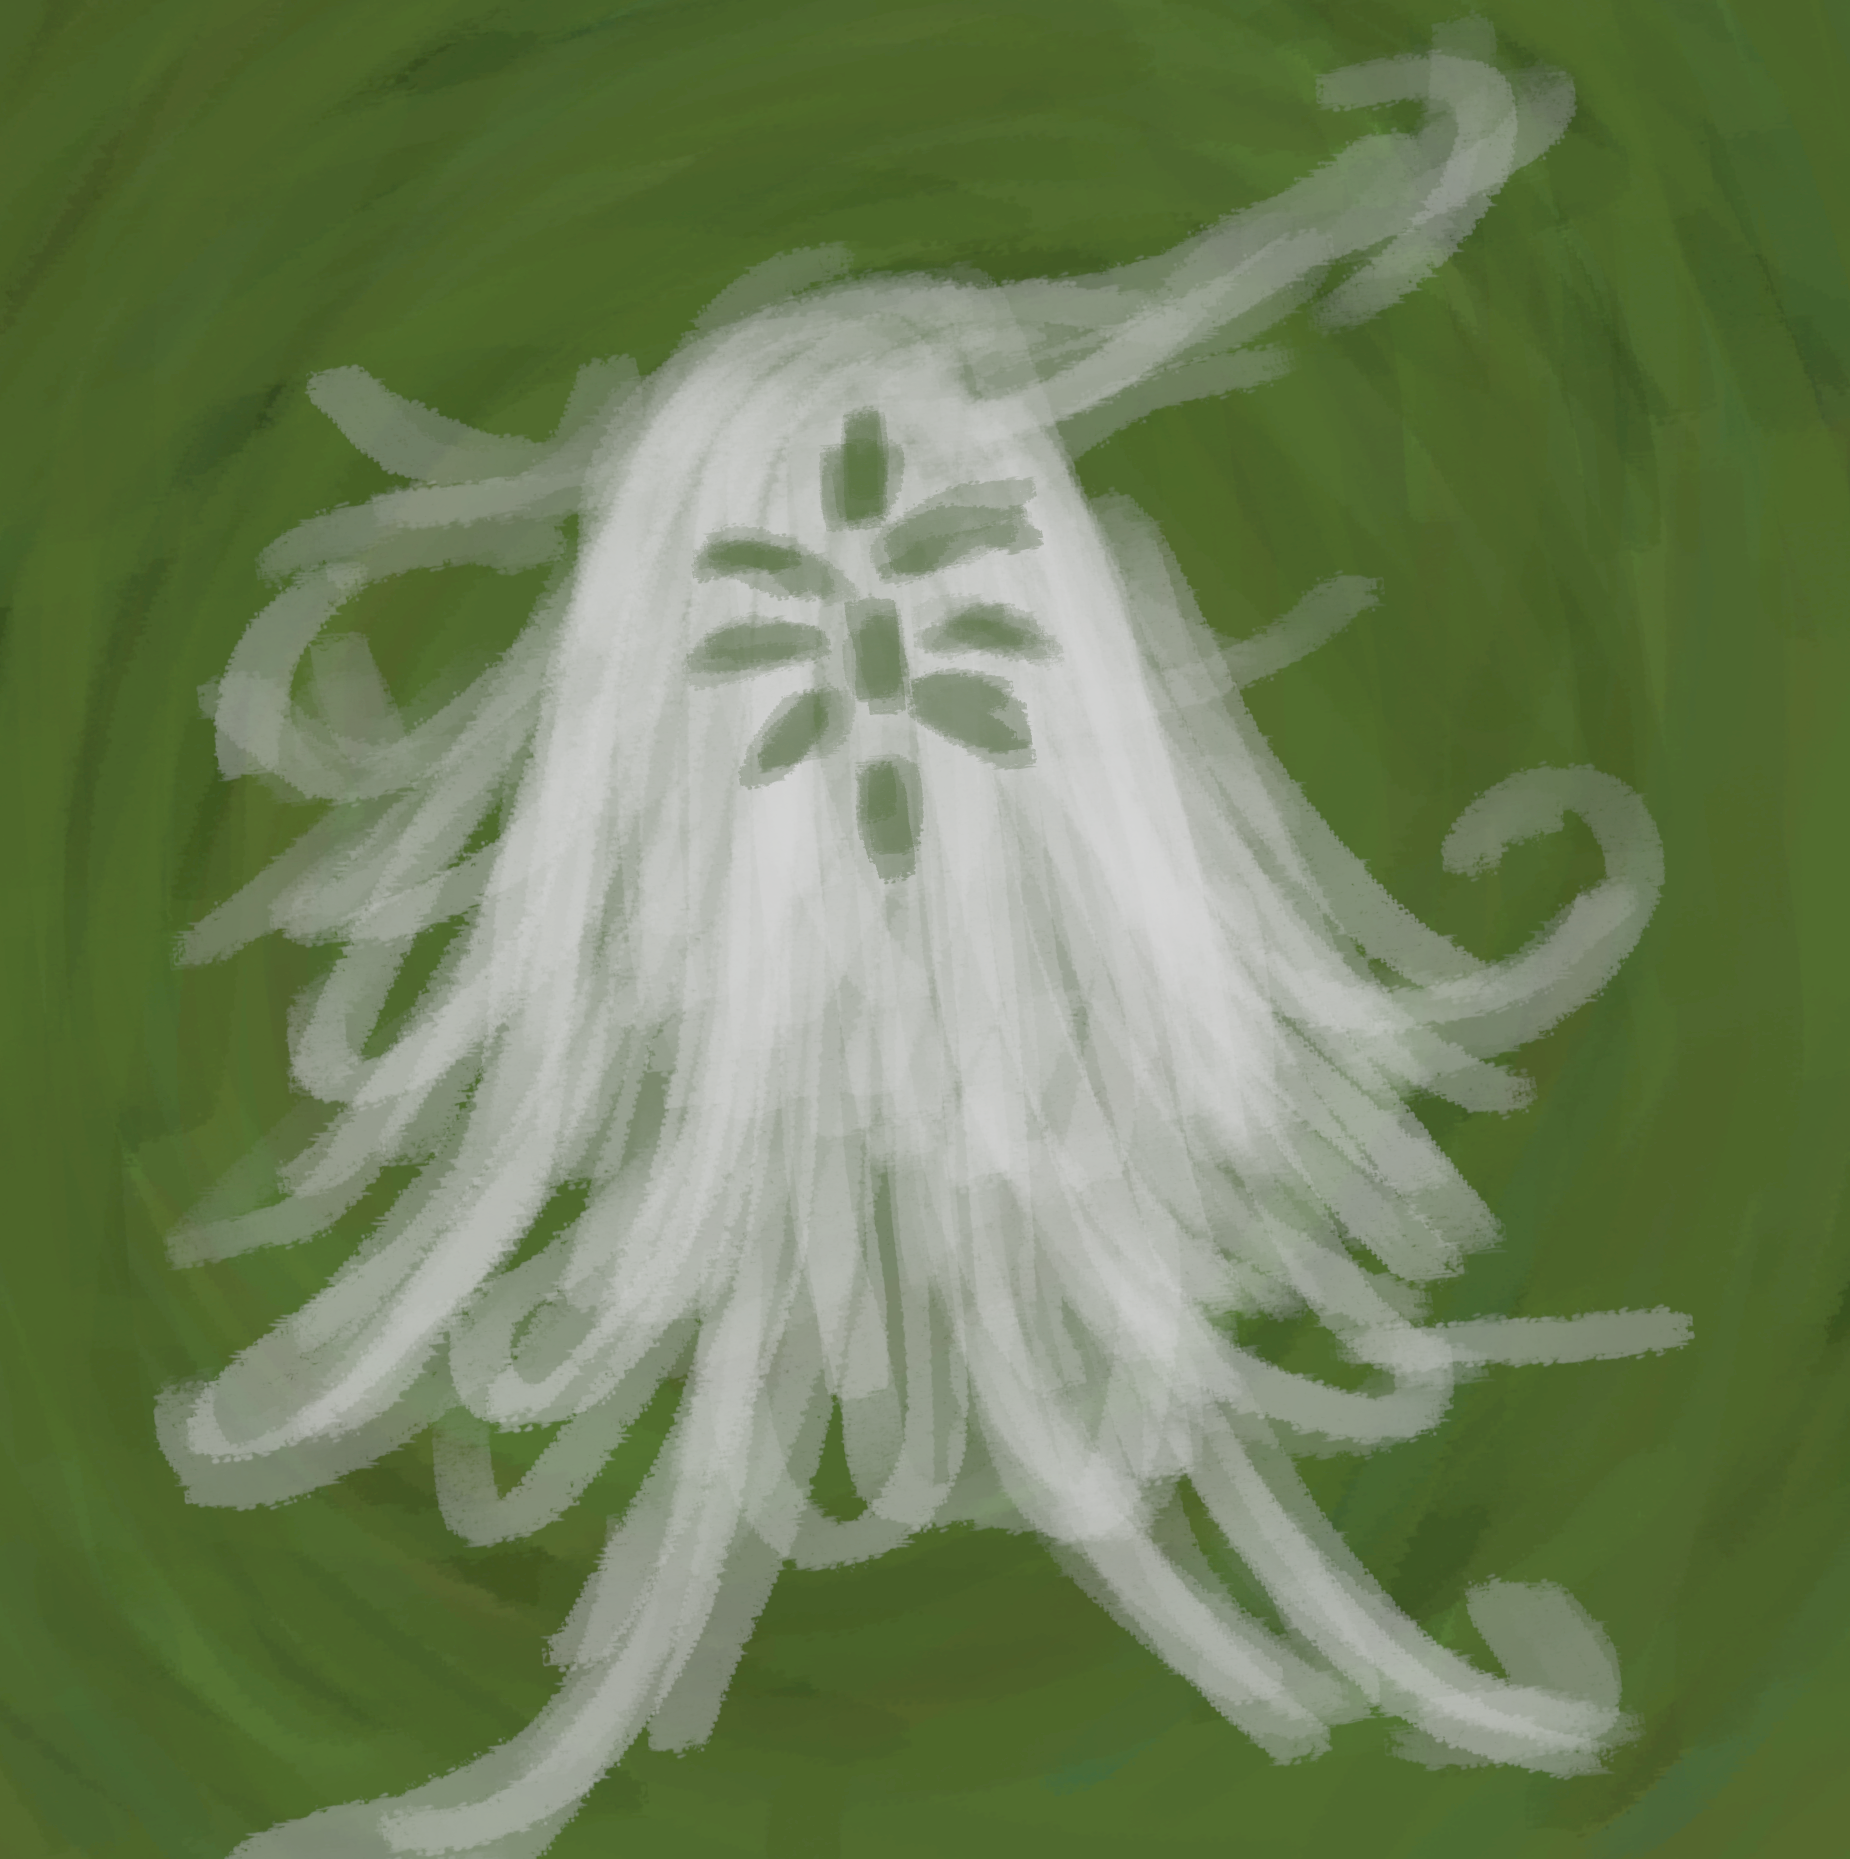 Digital drawing of a ghost